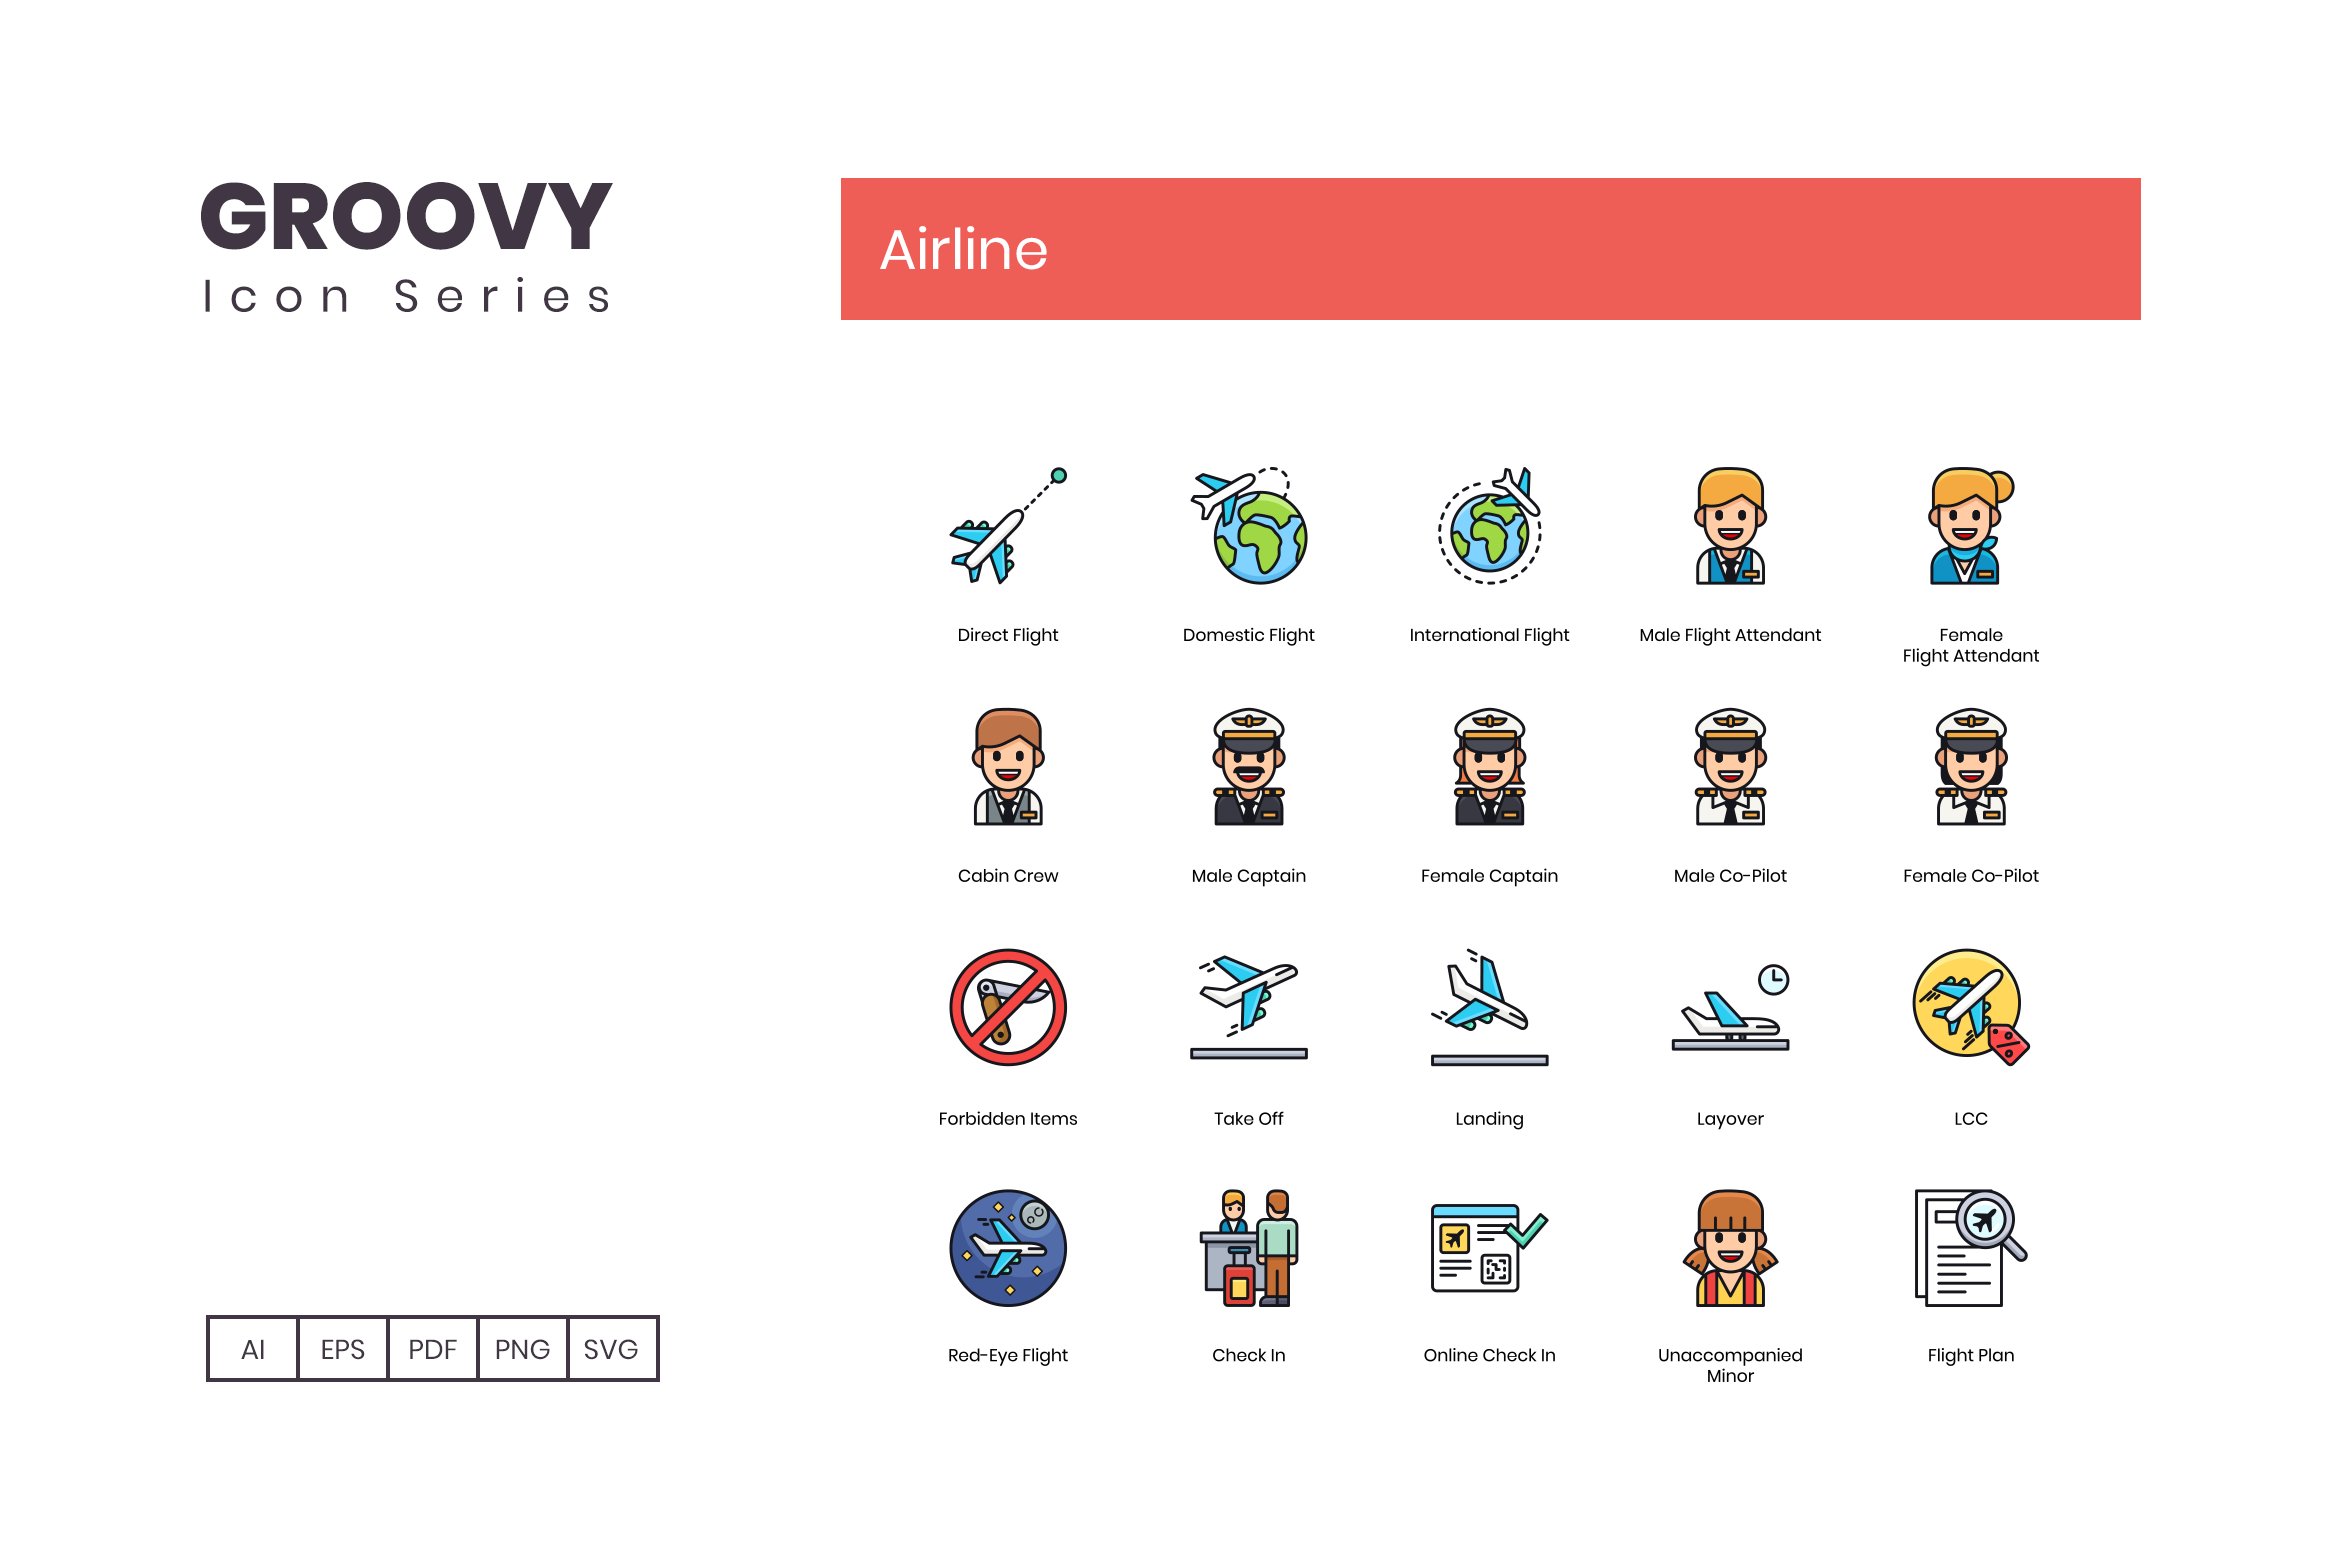 70 Airline Icons - Groovy Series preview image.